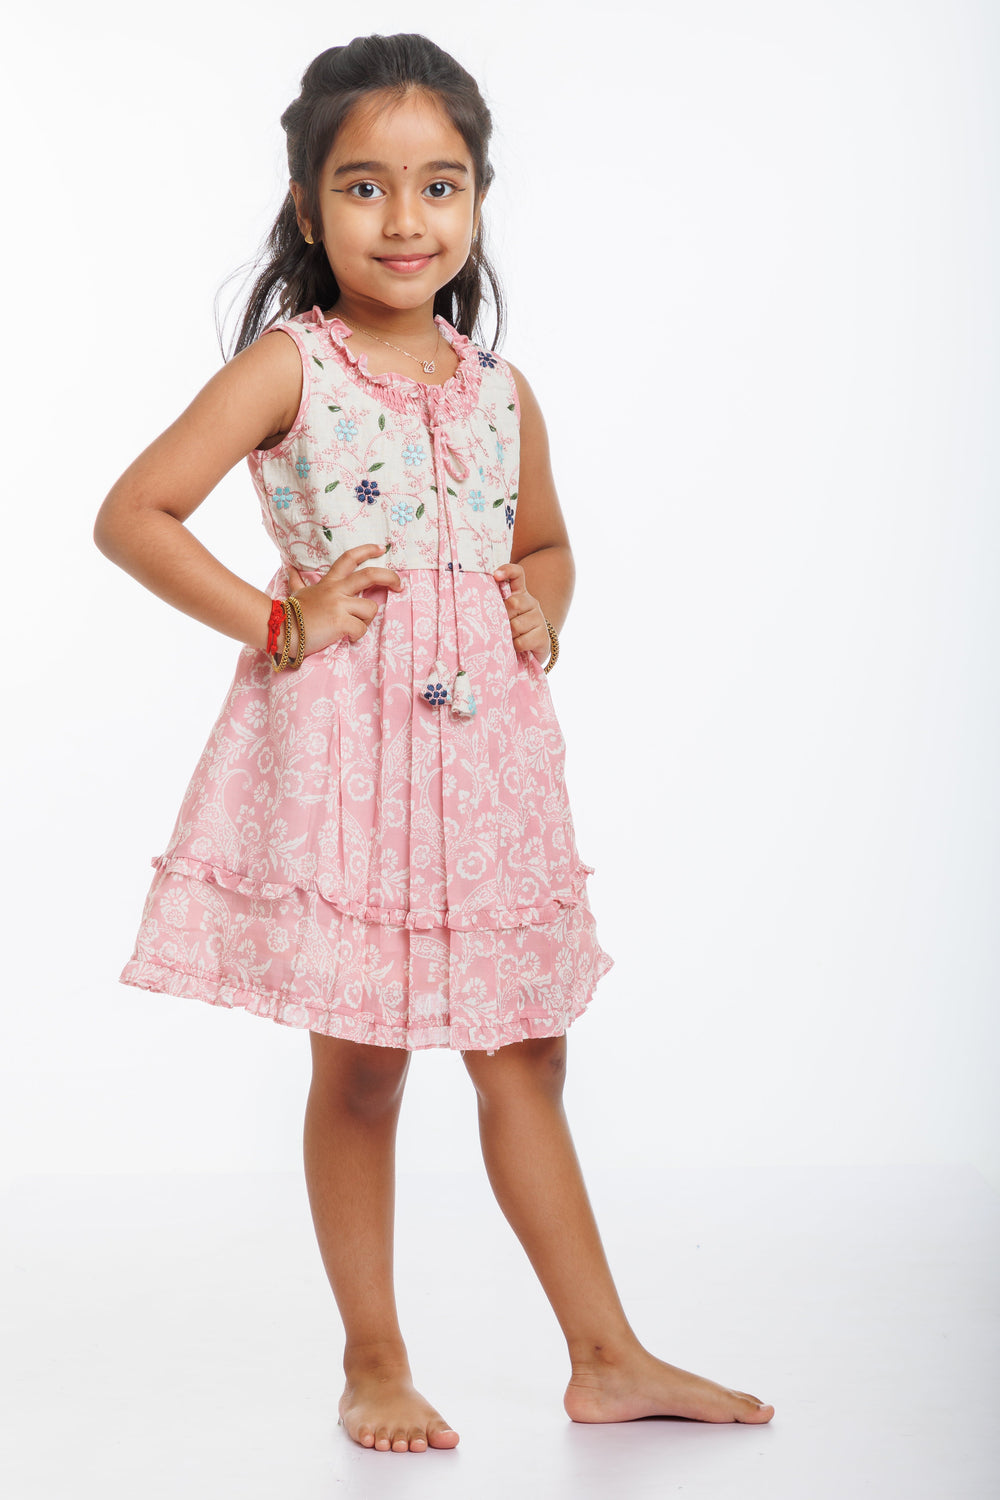 The Nesavu Girls Cotton Frock Charming Petal: Girls Pink Paisley Cotton Frock with Embroidery Detail Nesavu Buy Pink Paisley Embroidered Cotton Frock for Girls | Everyday Elegance | The Nesavu